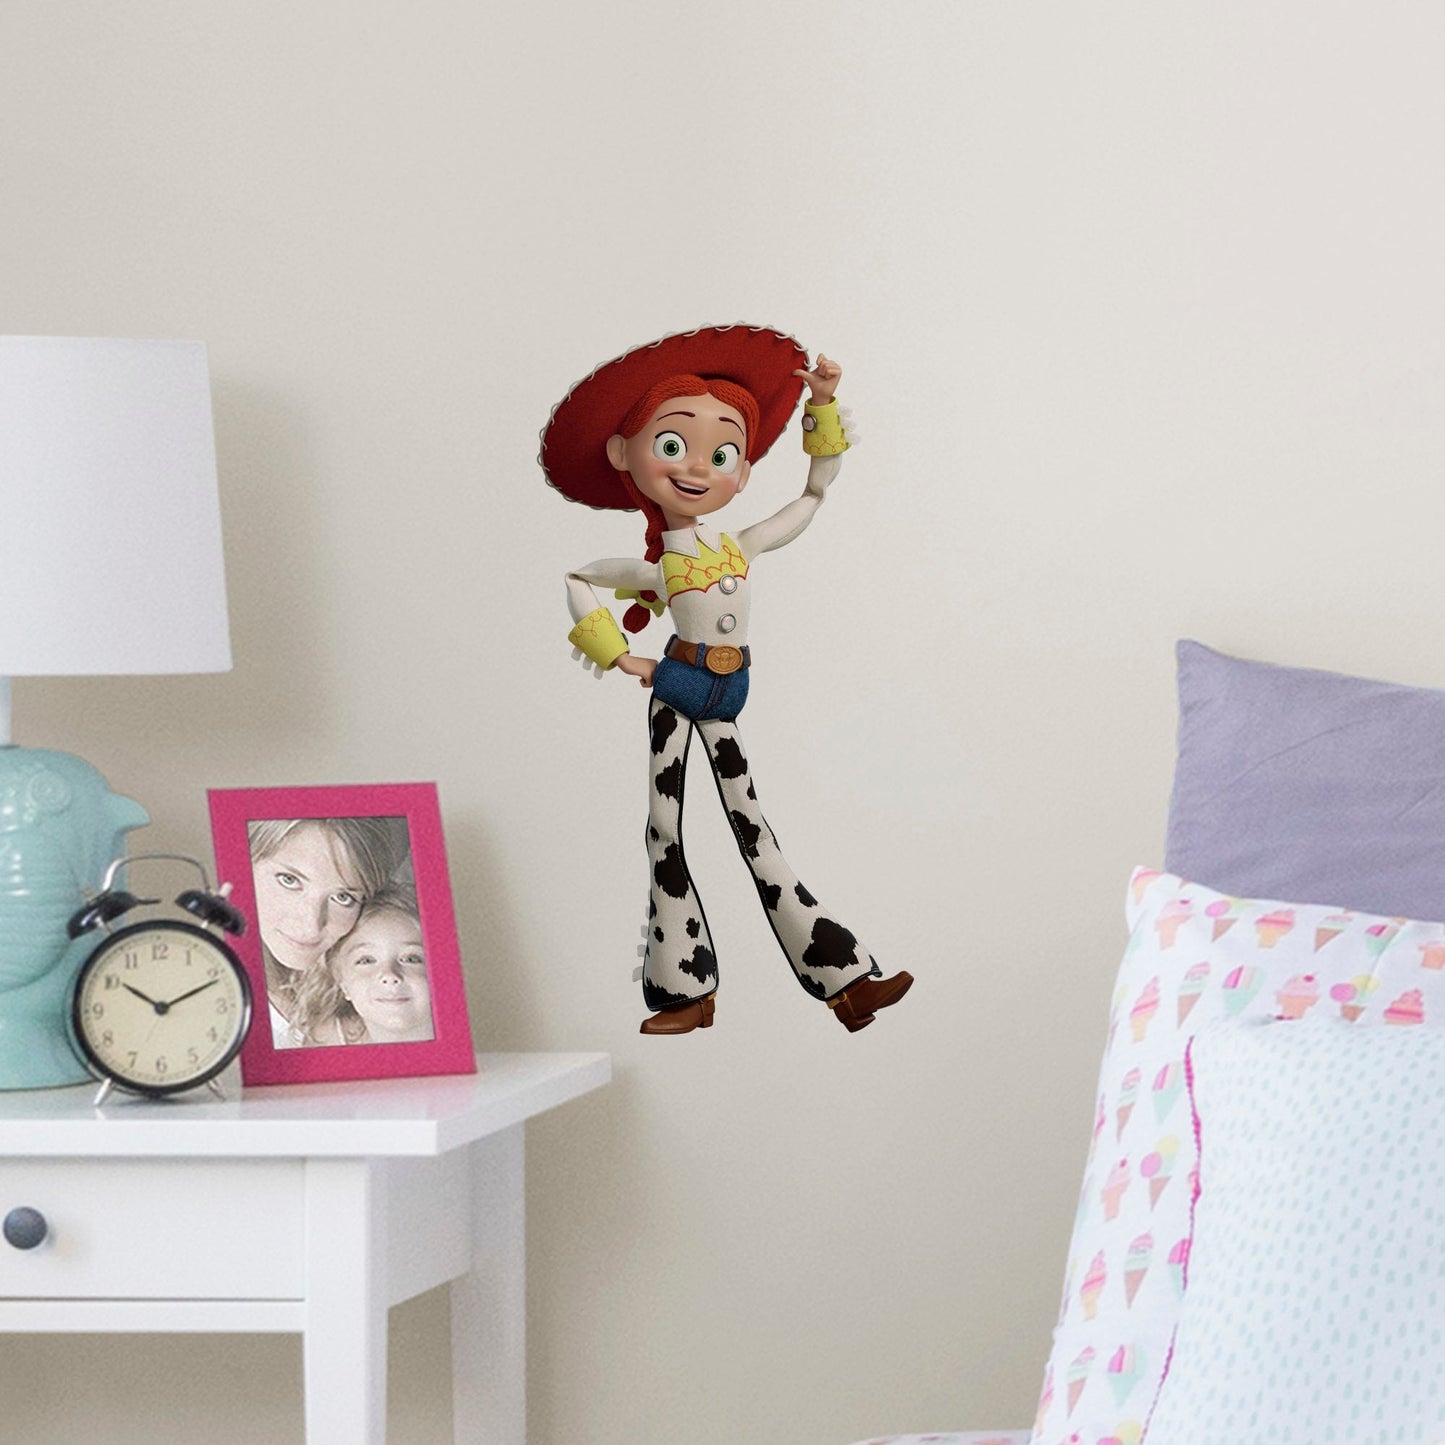 Toy Story 4: Jessie - Officially Licensed Disney/PIXAR Removable Wall Decal